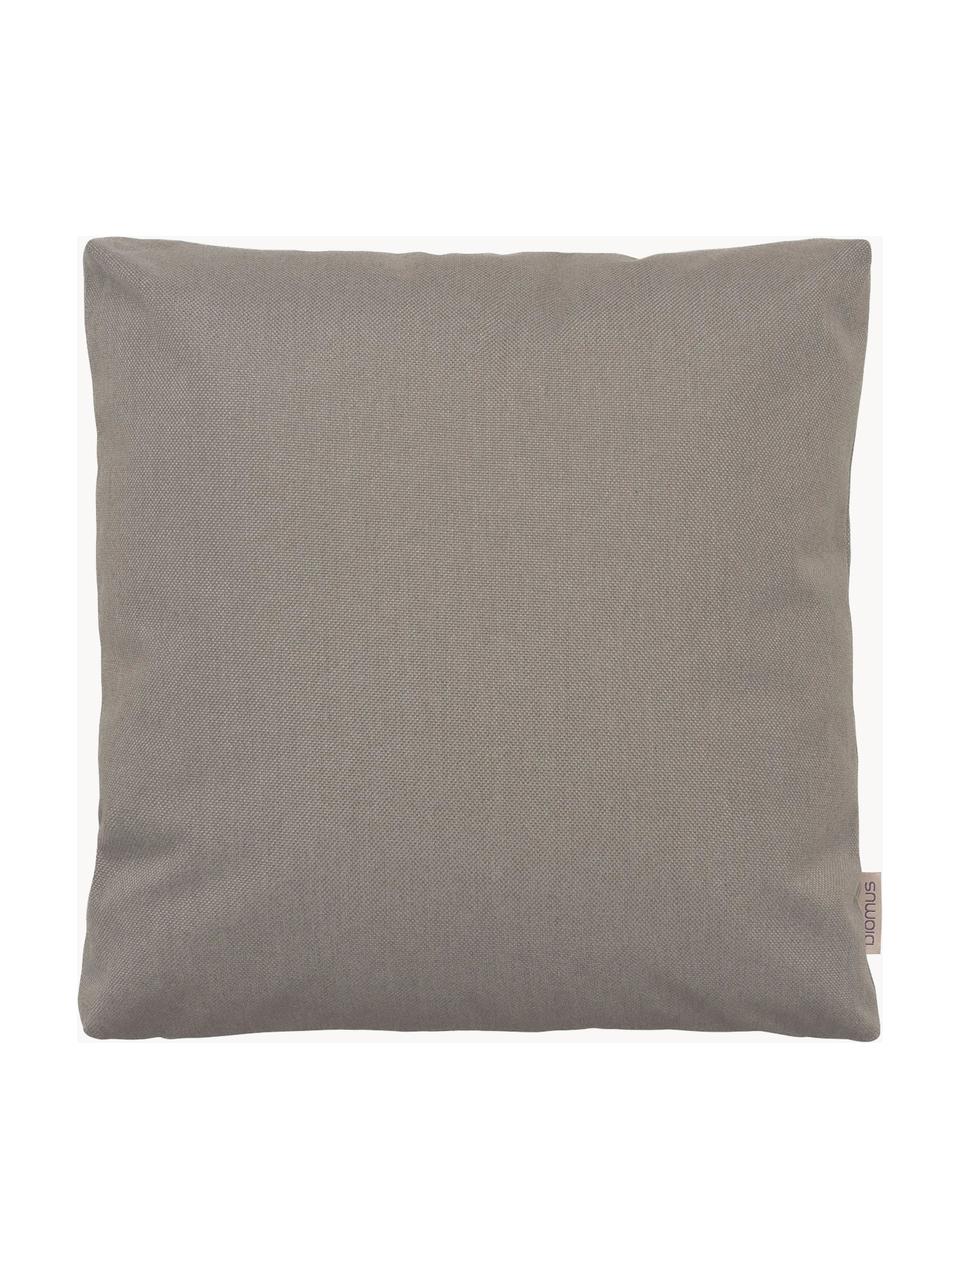 Outdoor-Kissen Stay, Hülle: 100 % Polyester, wetterfe, Taupe, B 45 x L 45 cm